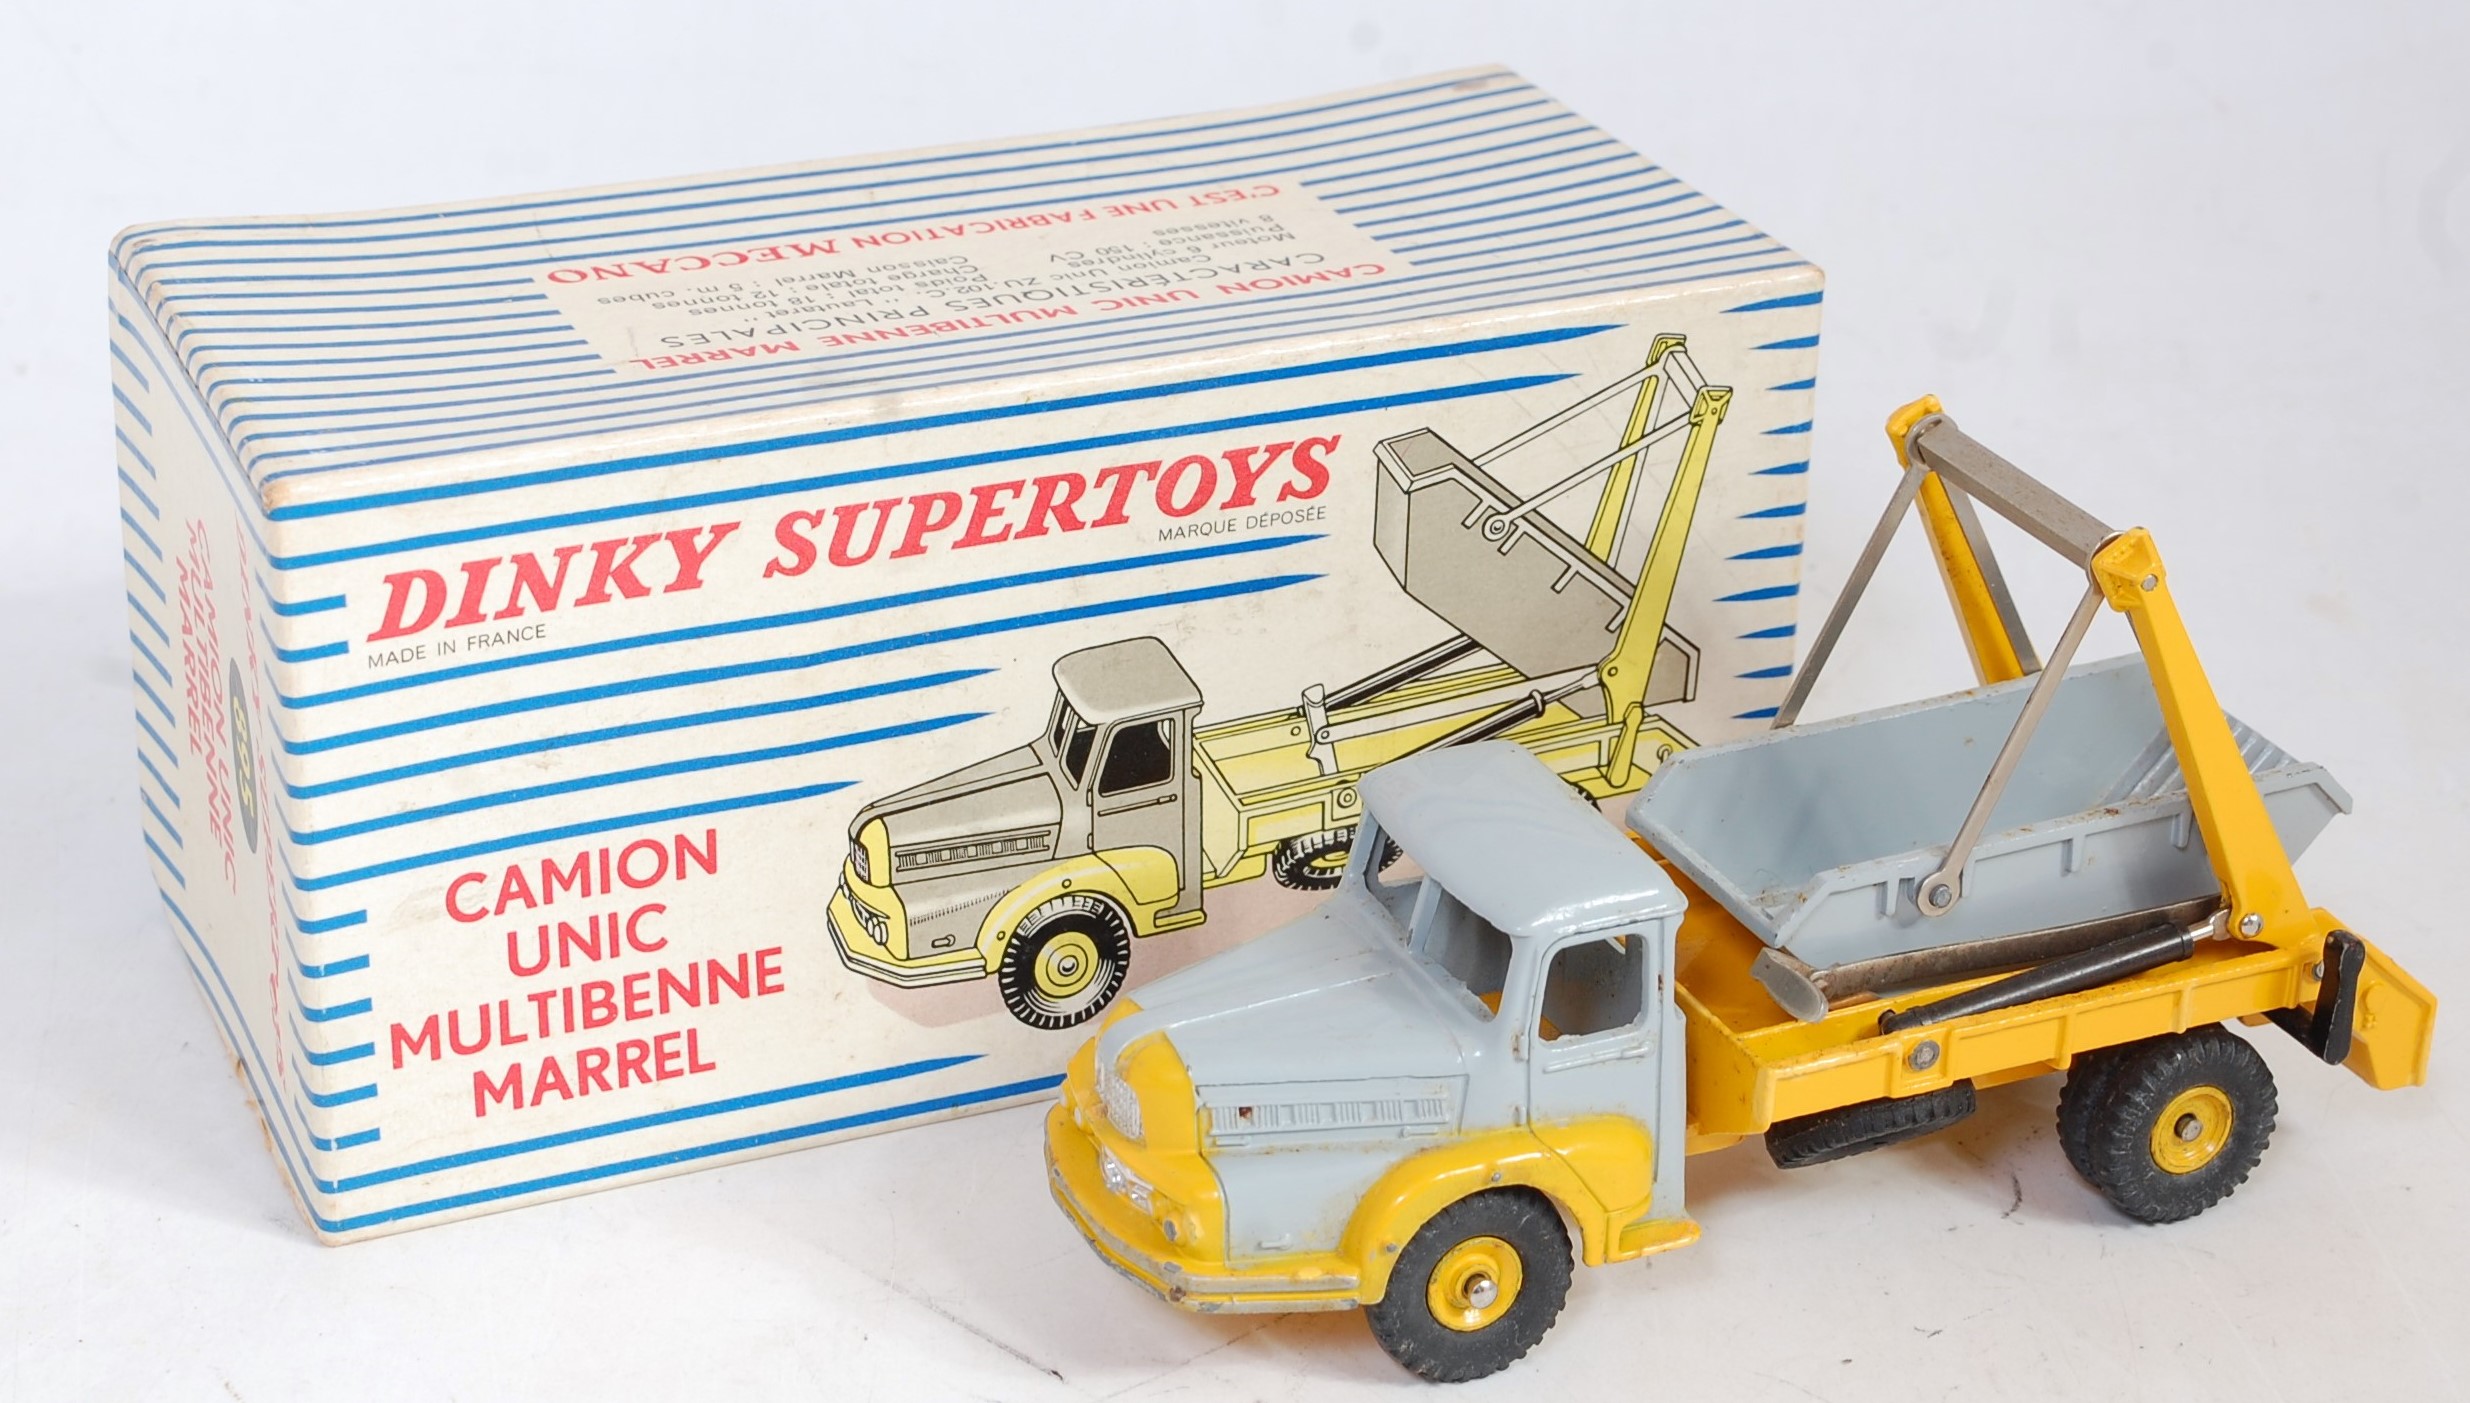 A French Dinky Toys No. 895 Camion Unic multi marrel skip lorry comprising of yellow and grey body